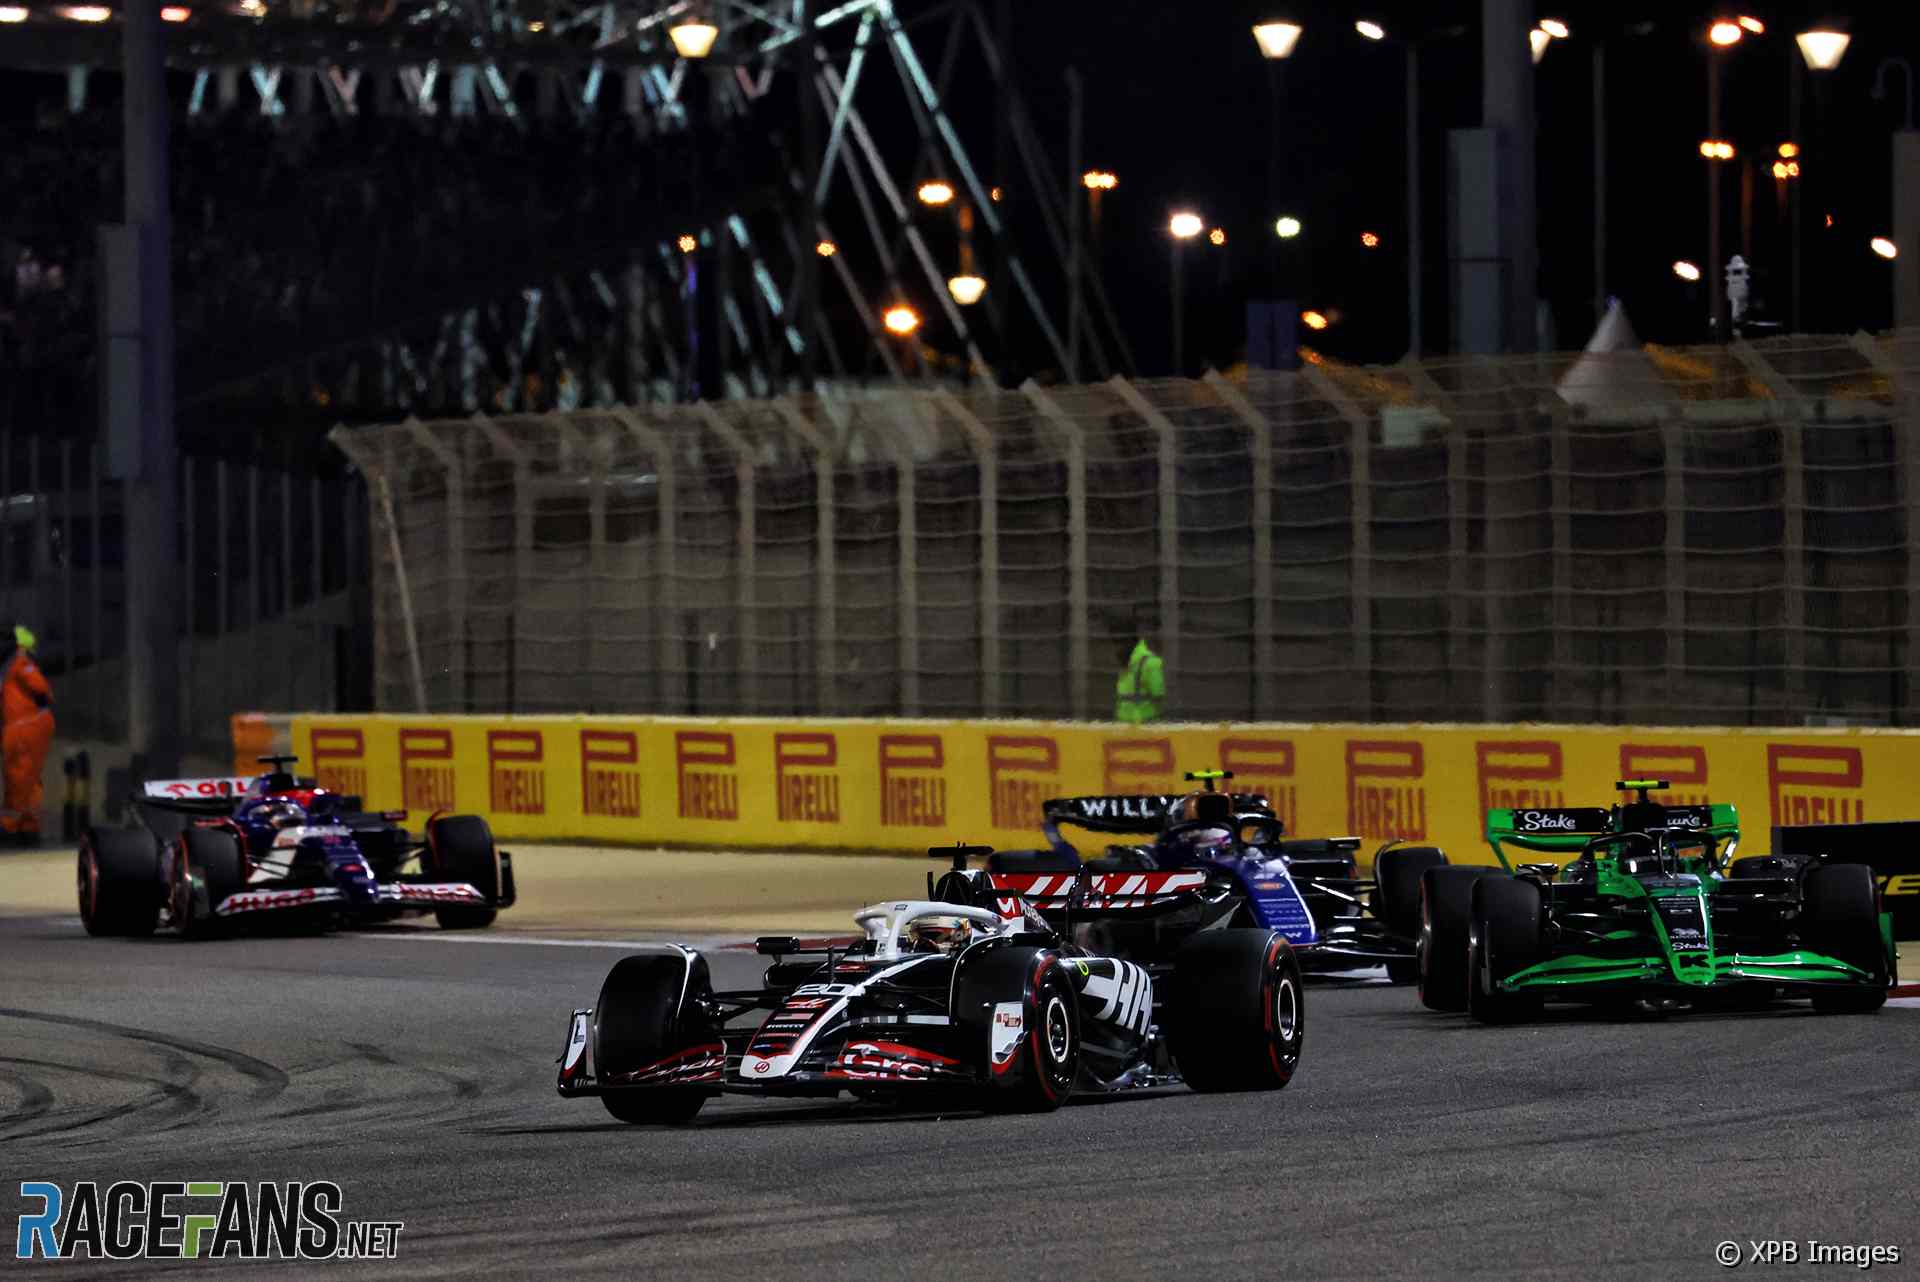 RB will complain to FIA over Magnussen’s “unsportsmanlike” tactics · RaceFans